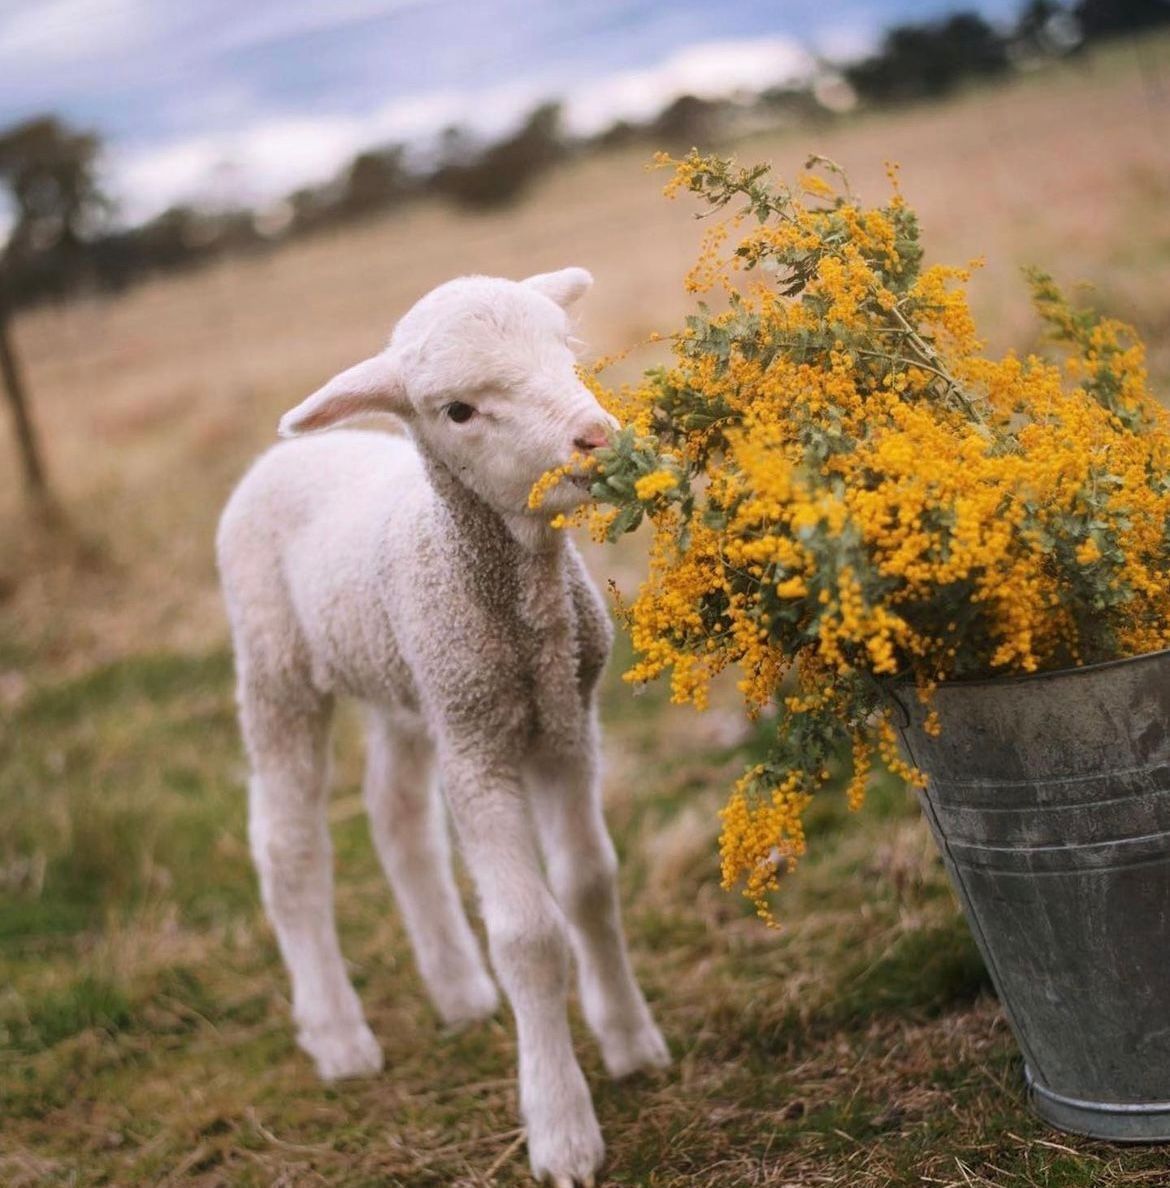 Cute Australian Merino 'poddy lamb' - one which is fed by hand, creating a special bond between farmer and animal 😍 📸 & 🐏 IG elyceandthewild3 - photo taker & sheep farmer apprentice